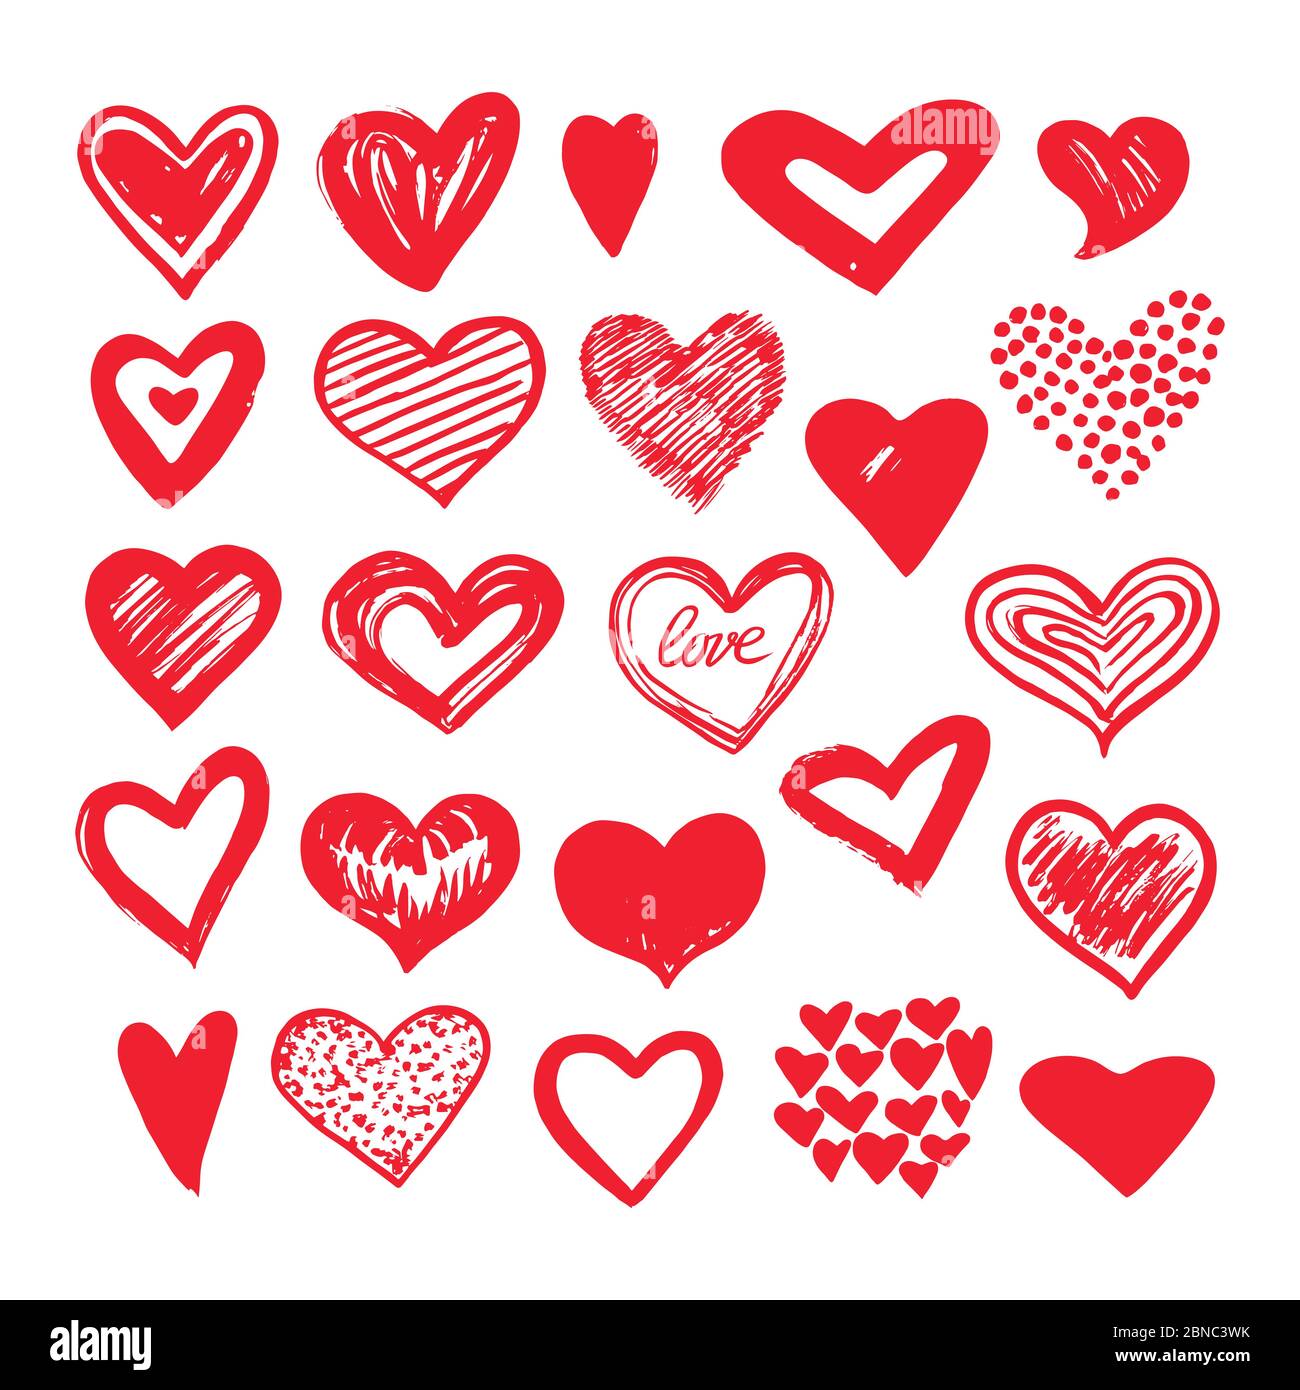 Sketch Hearts Romantic Doodle Love Elements Hearted Shapes Valentines Day Vector Icons Illustration Of Heart Shape Drawing Stock Vector Image Art Alamy